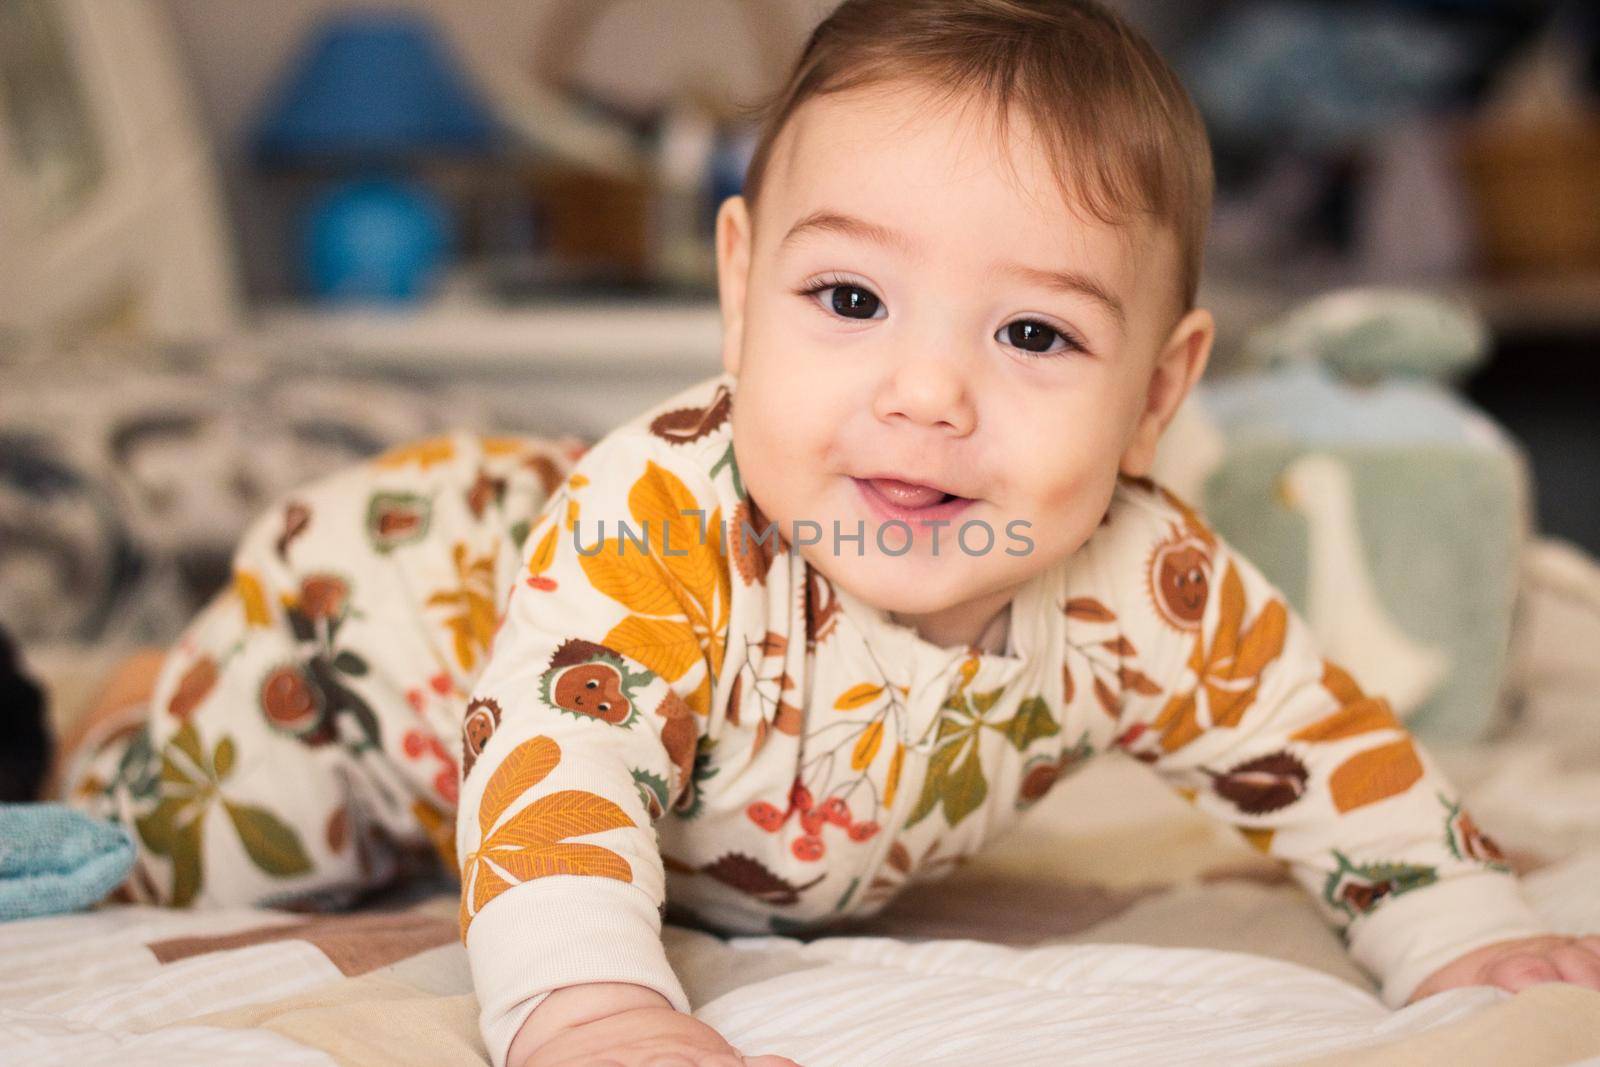 Cute baby on a bed wearing a romper suit pajama onesie looking directly at the camera